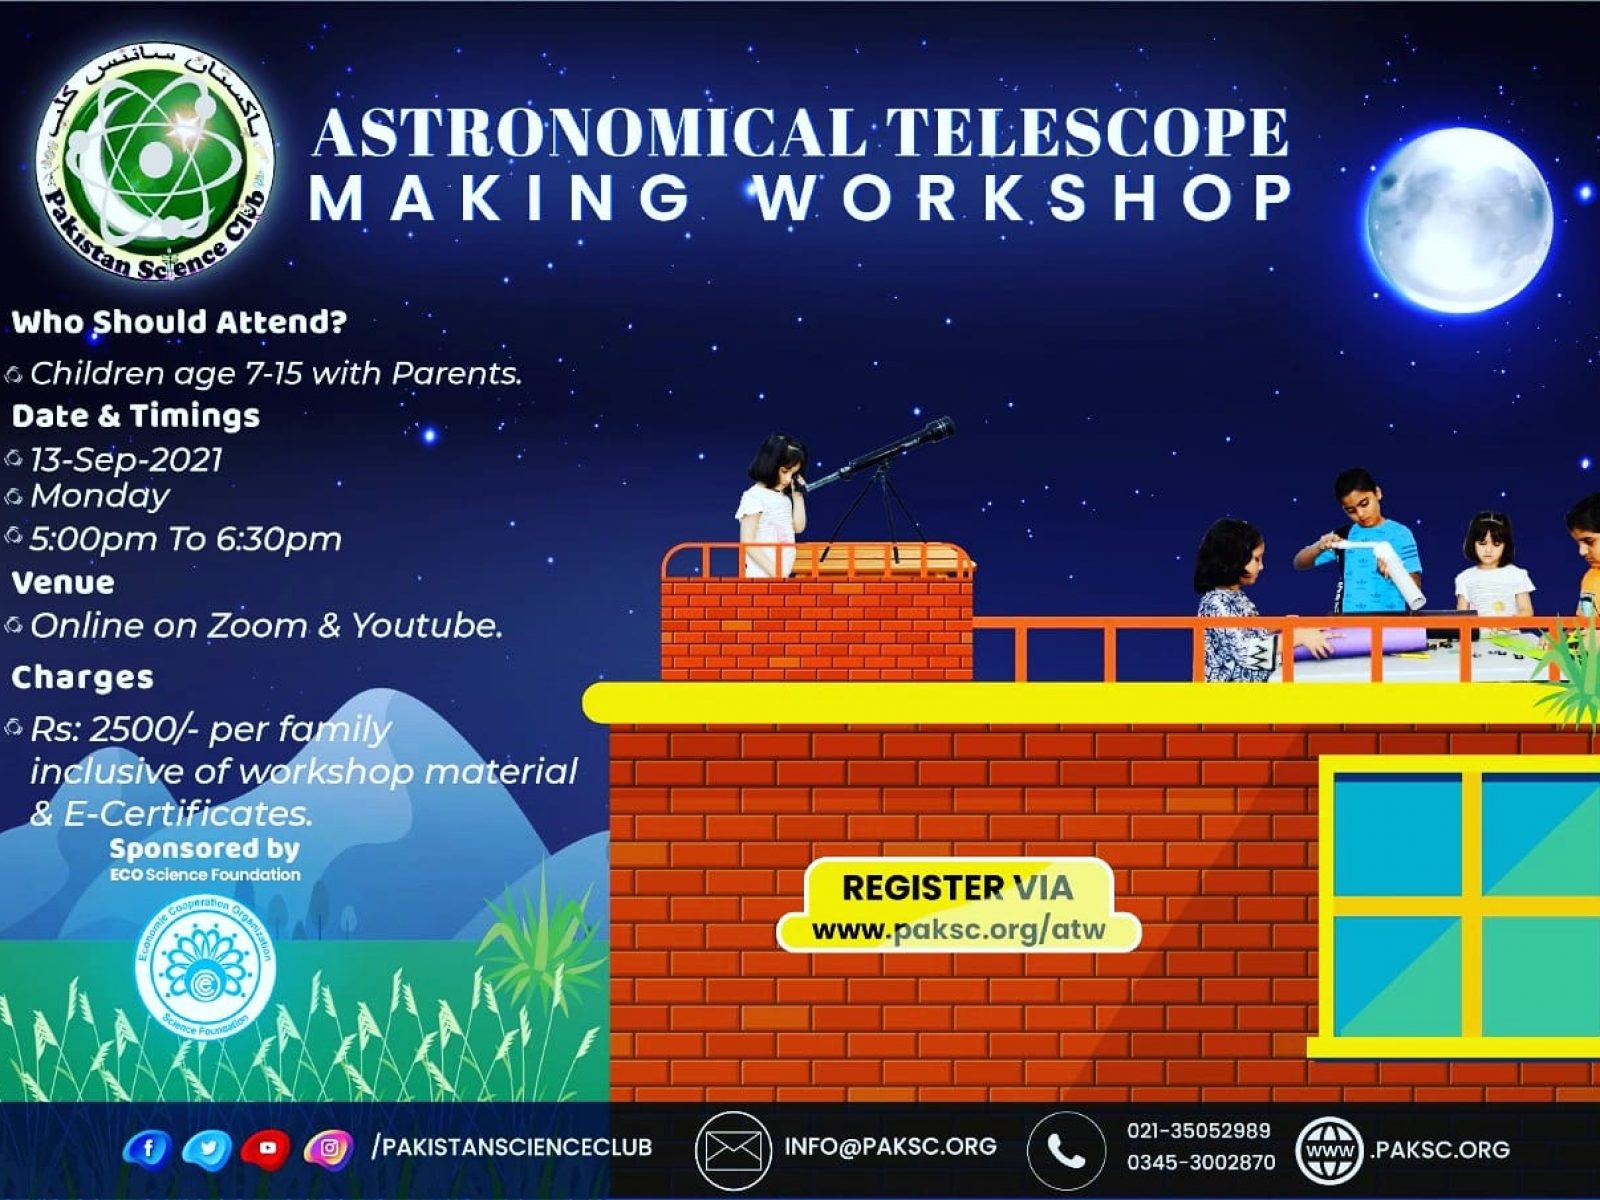 PSC & ECOSF Announced Online Astronomical Telescope Making Workshop